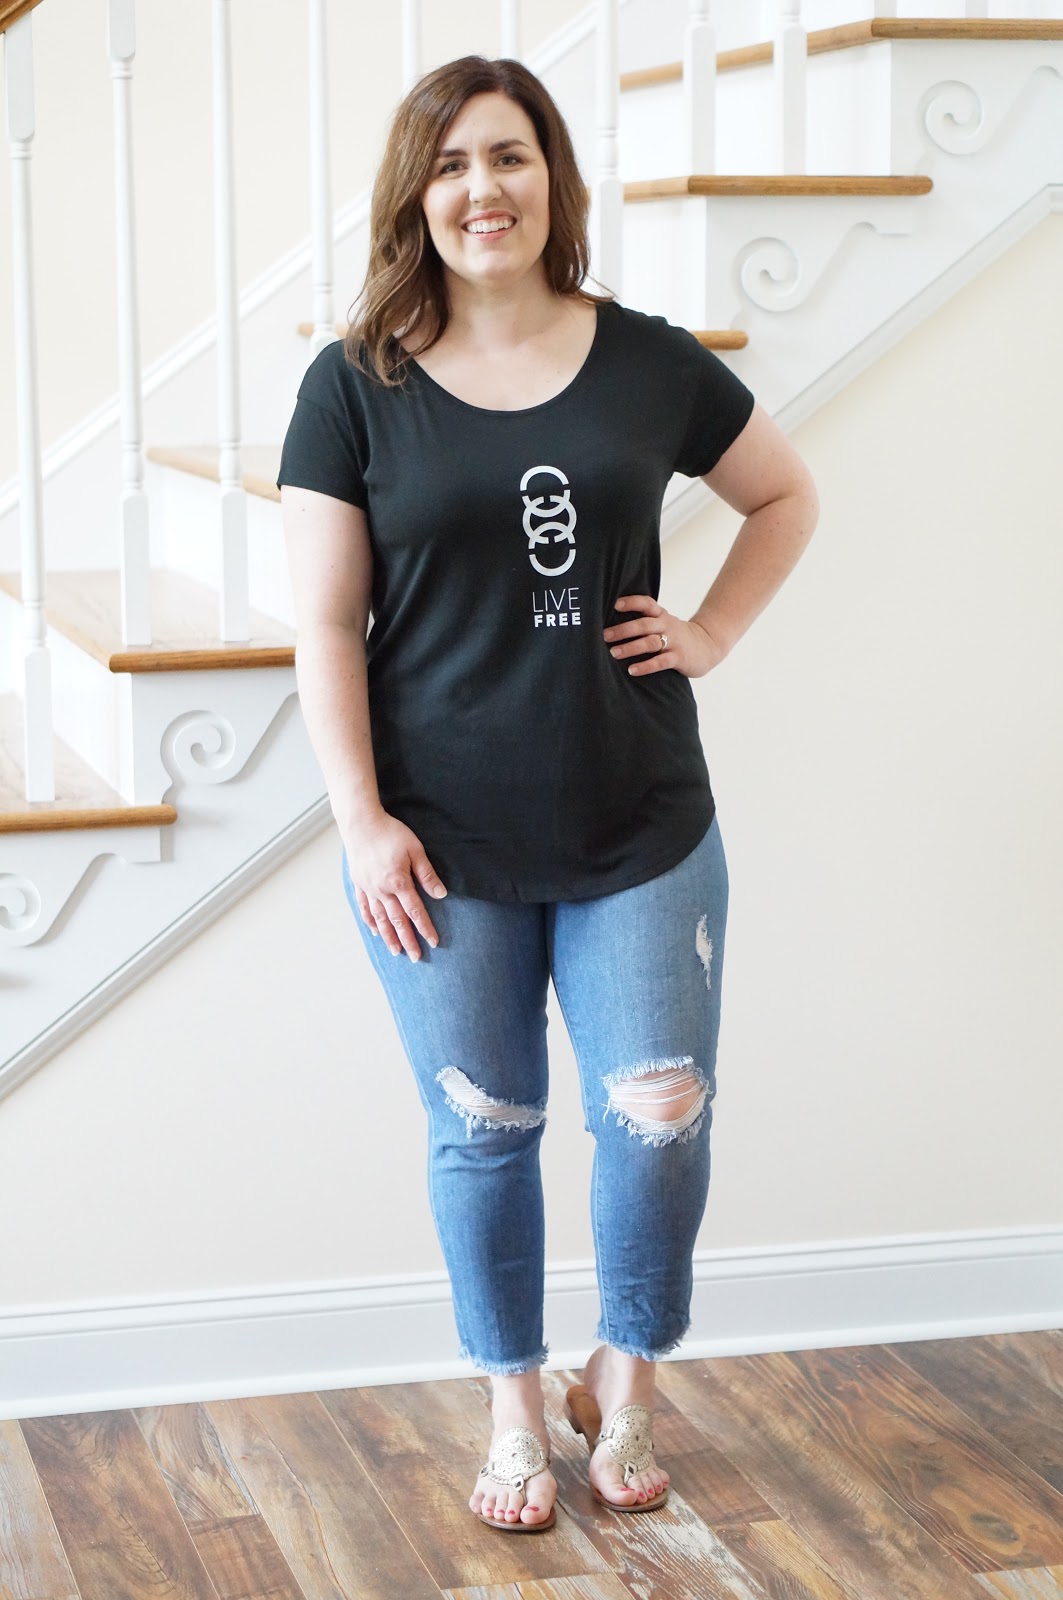 Popular North Carolina style blogger Rebecca Lately shares her collection of Sevenly tees. Click here to read and support Anti-Human Trafficking month!